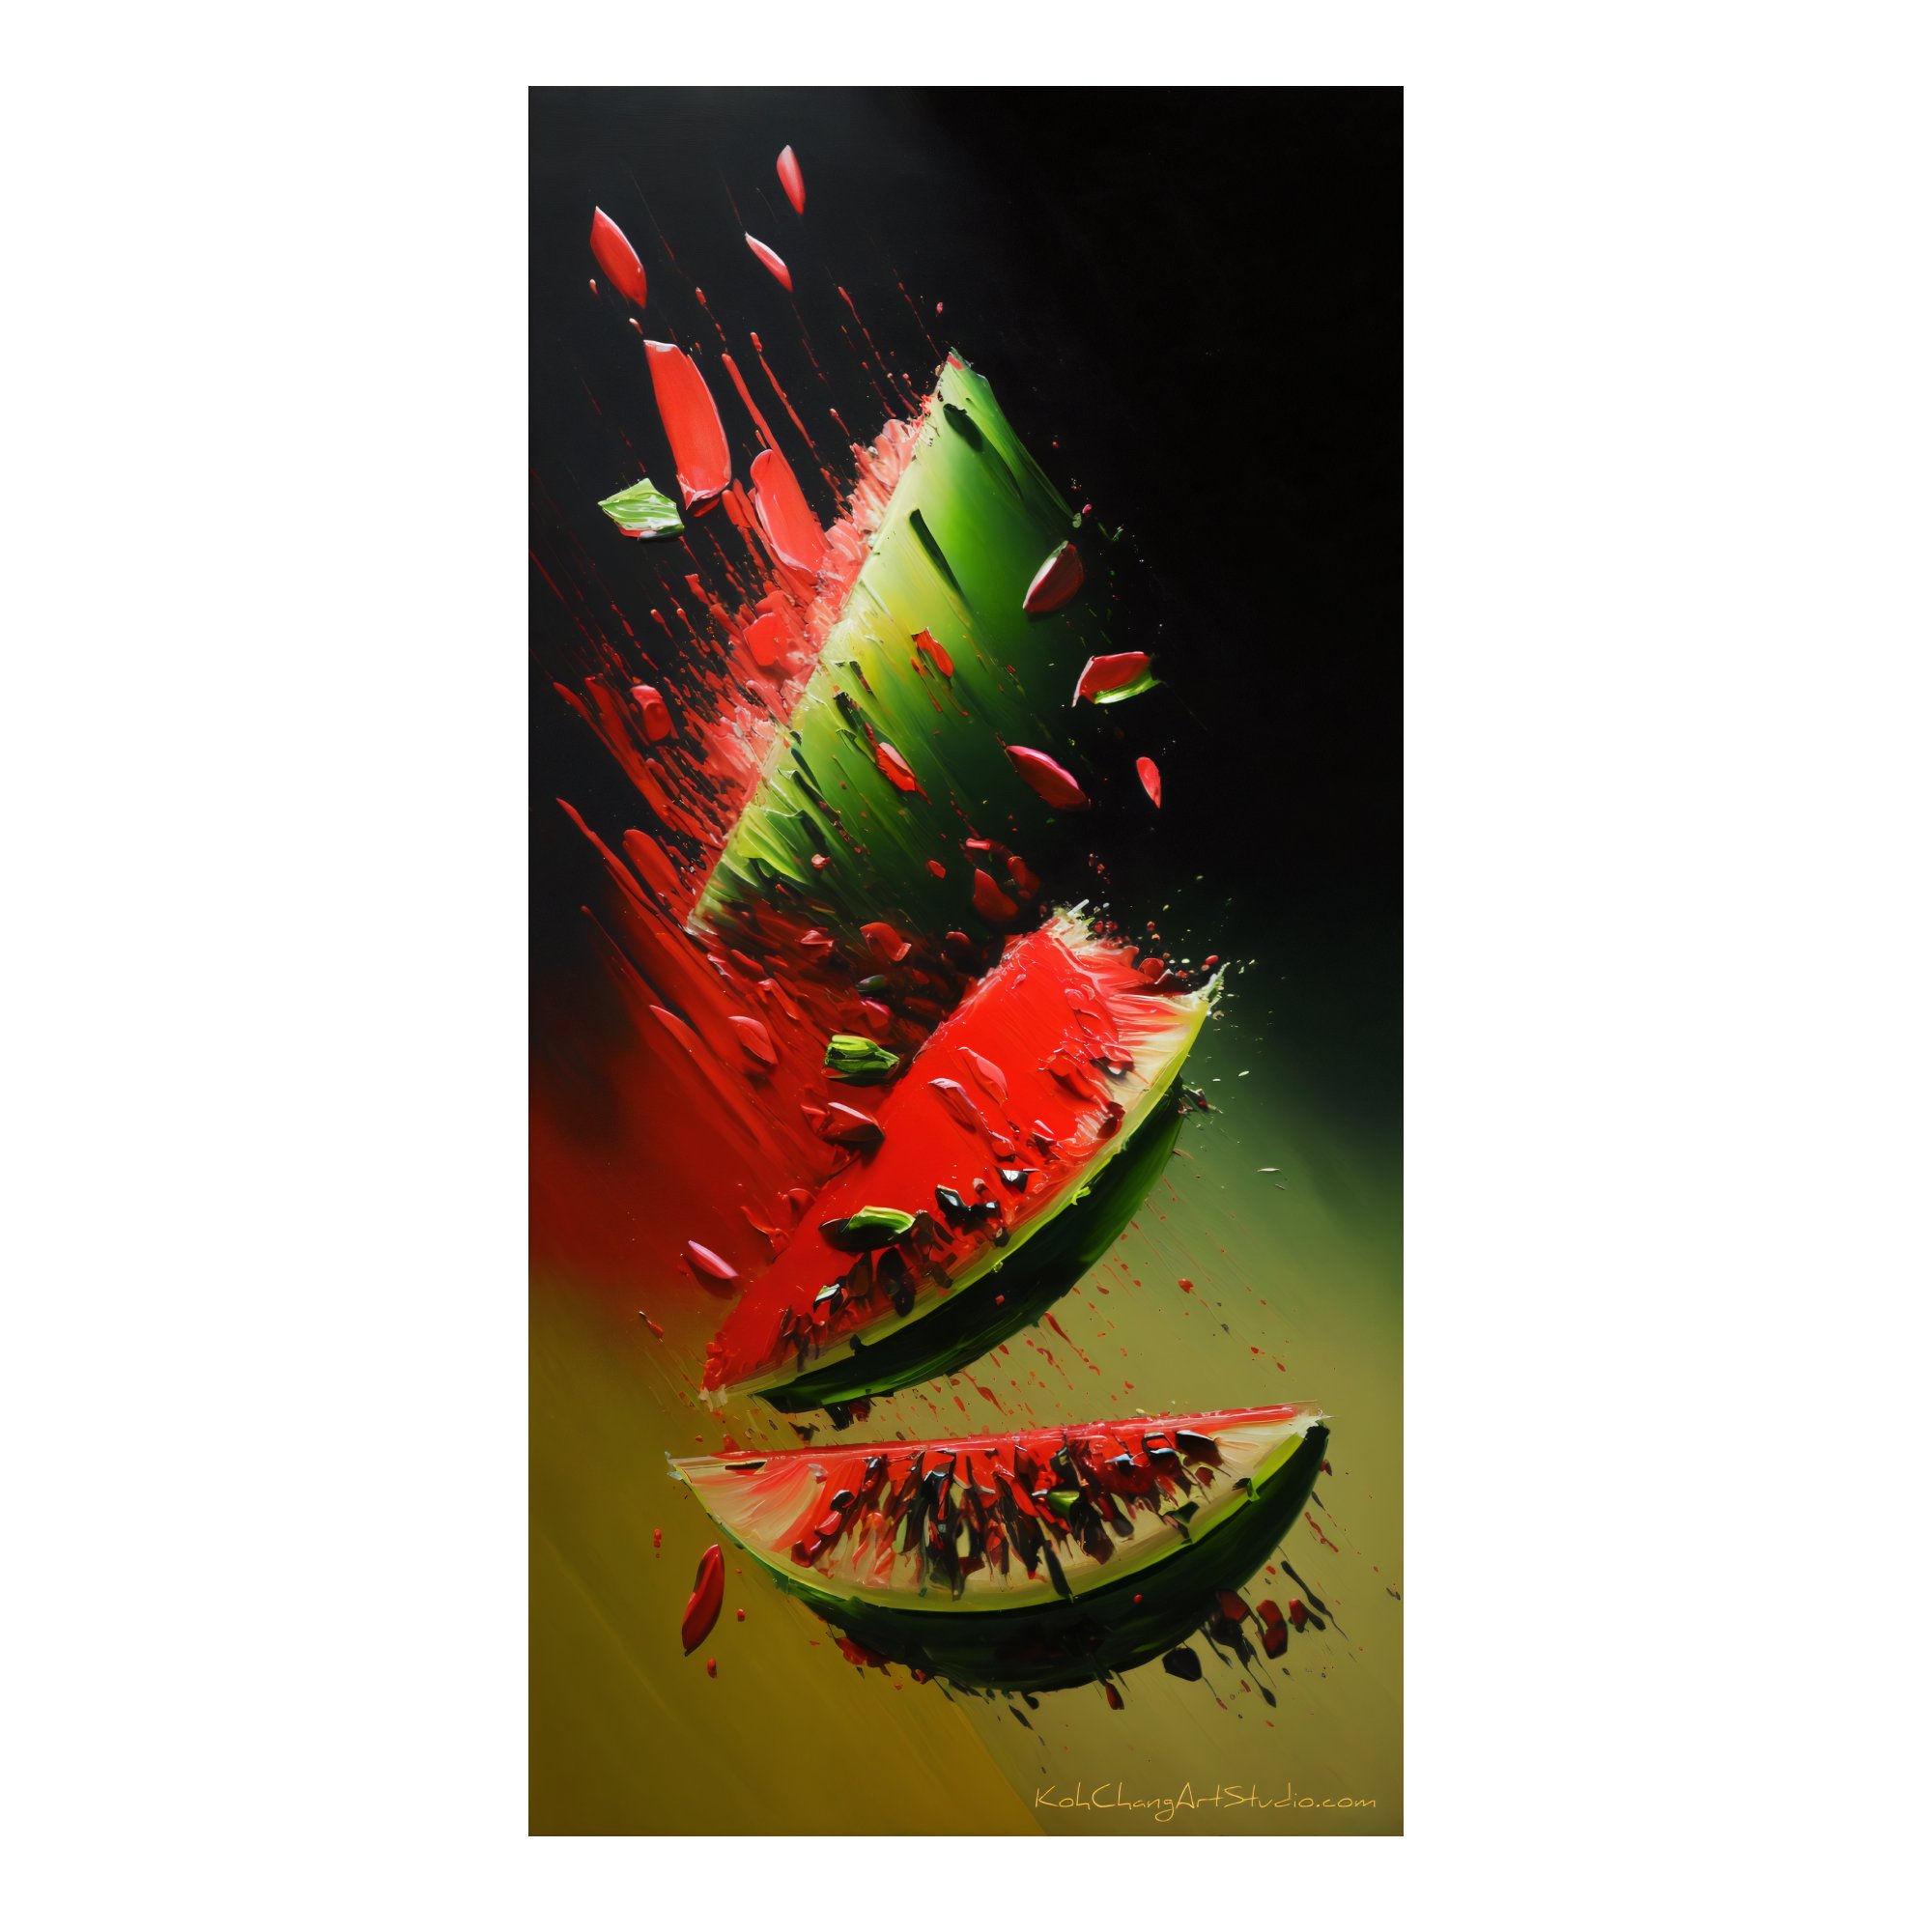 MELON MEDLEY Design - Varied painting styles of watermelon slices, capturing the essence of summer's juiciness.